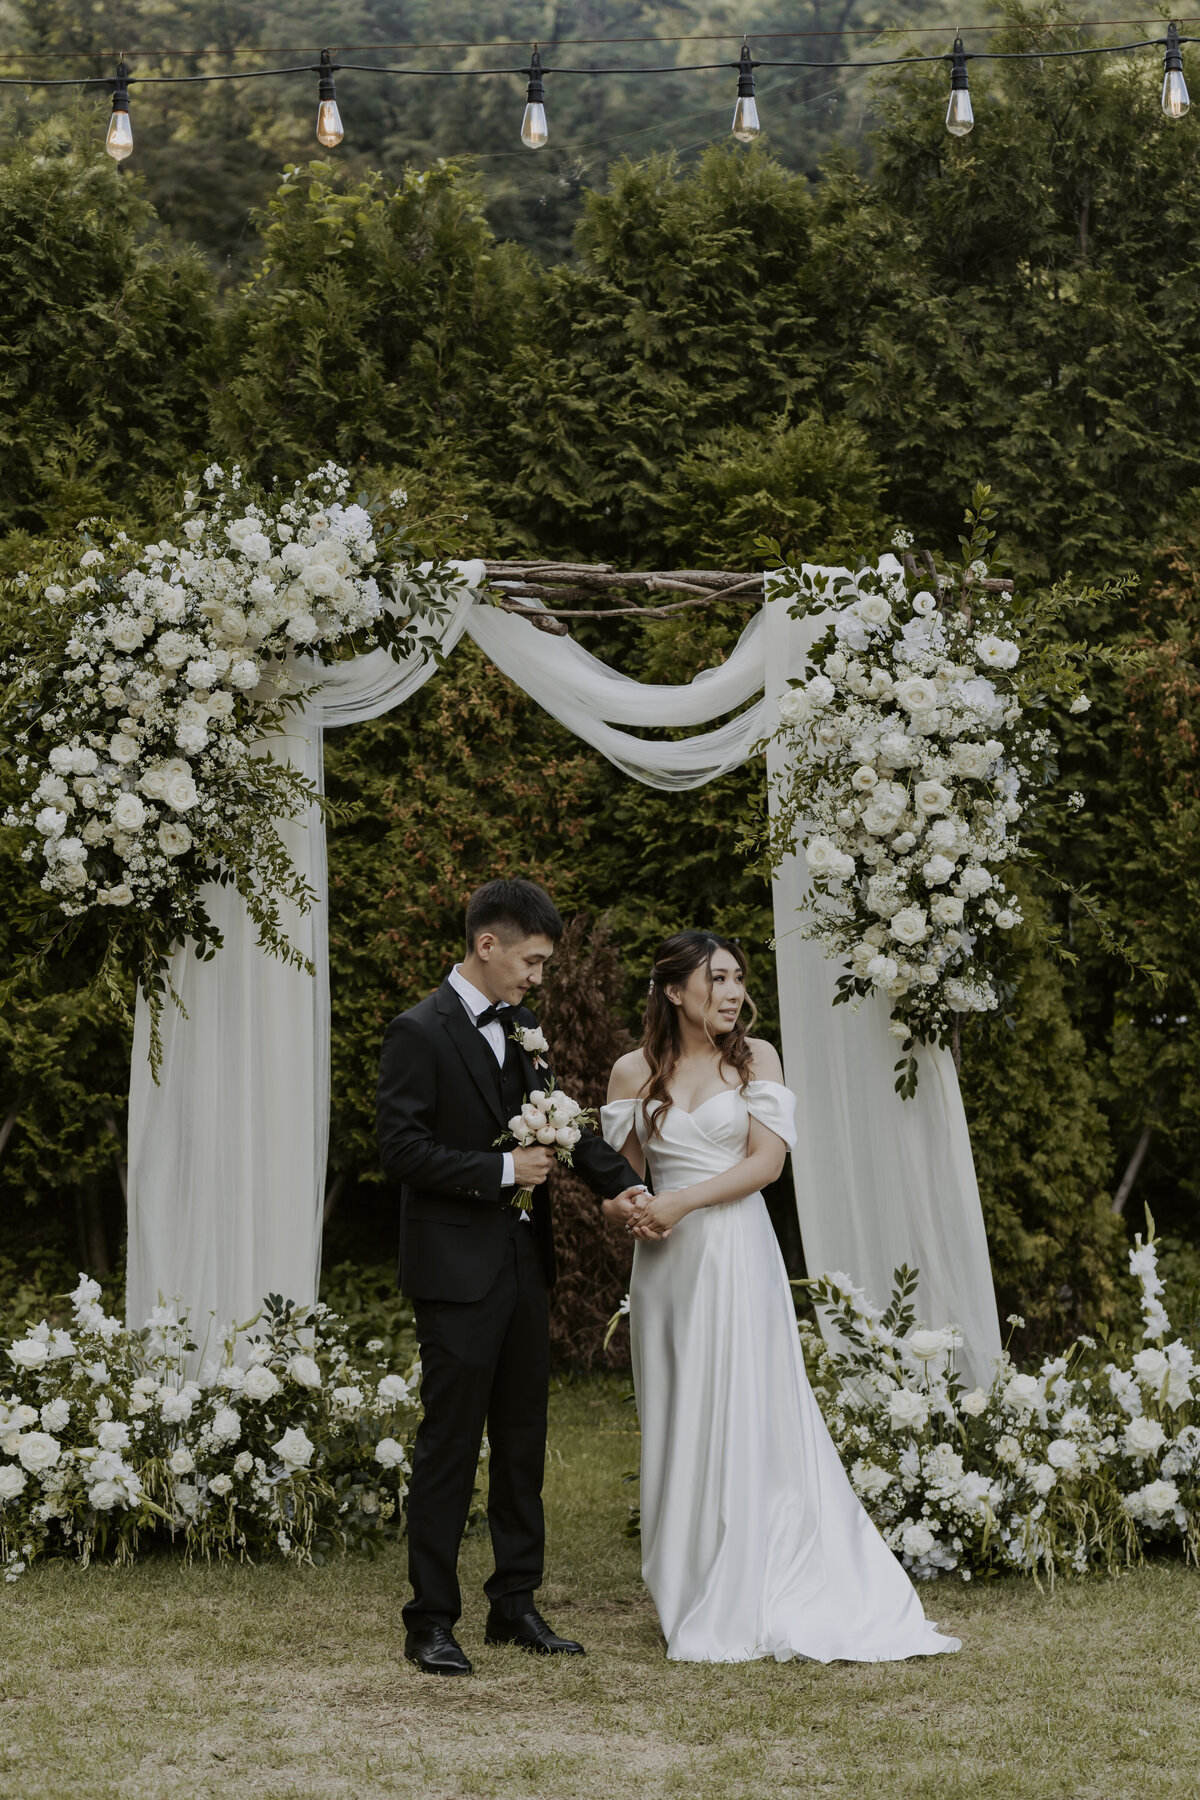 the couple standing while the groom holds the bride's bouquet